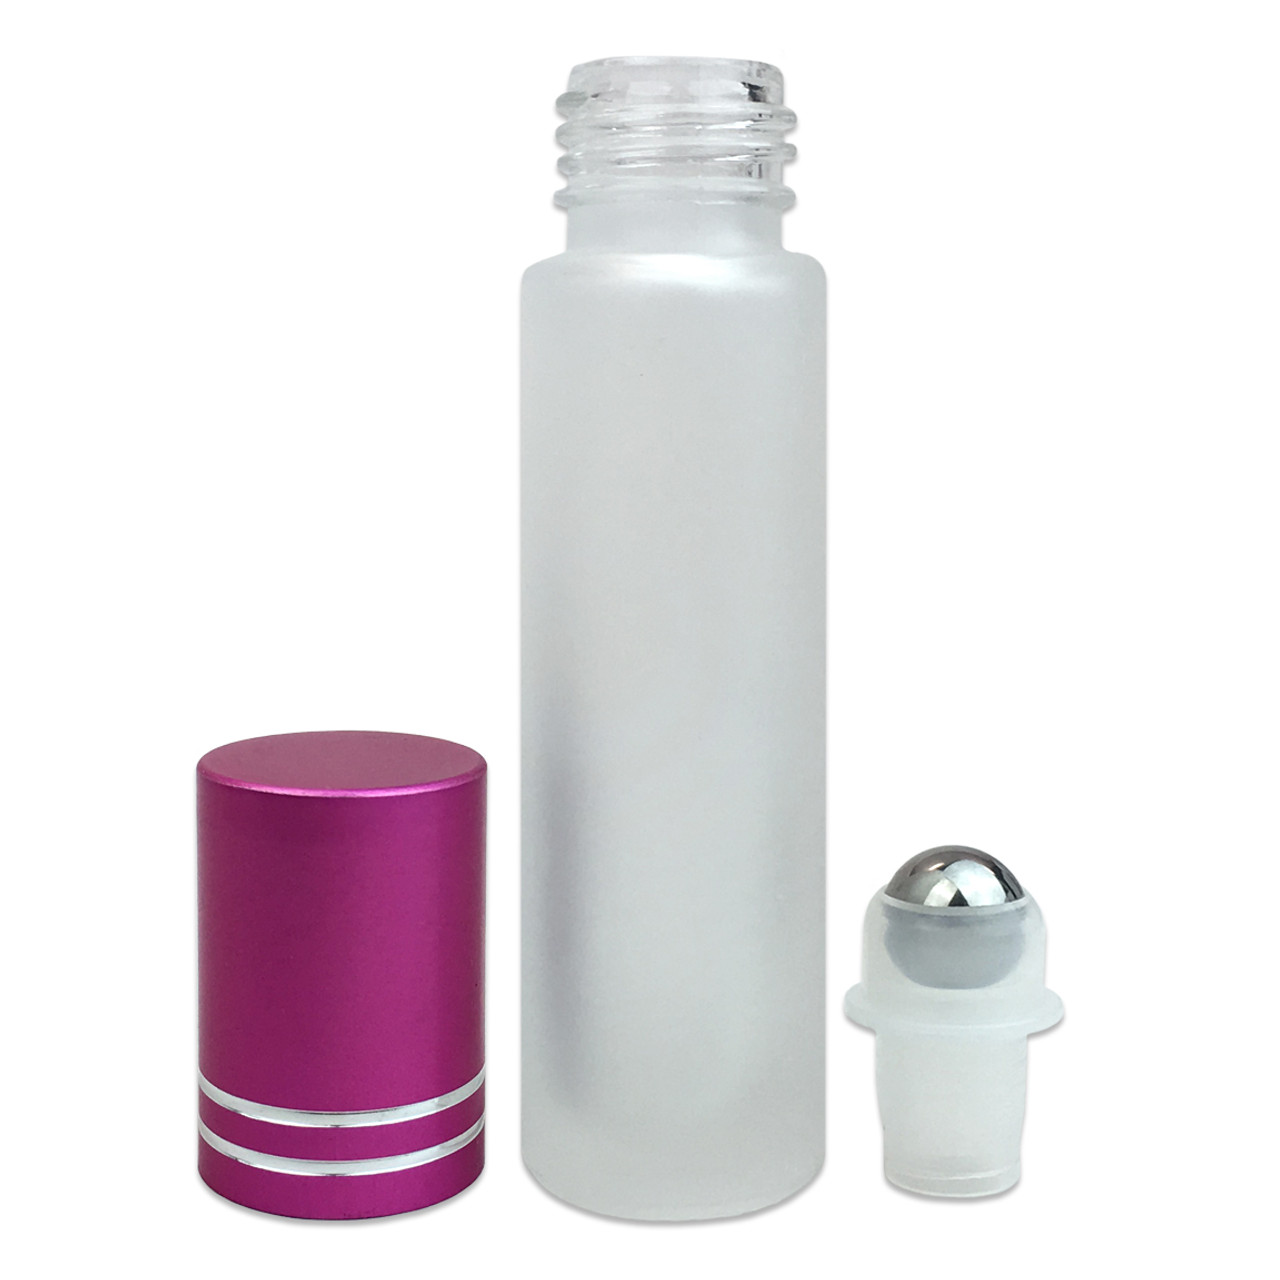 10ML(1/3oz) Glass Roller Bottles with Stainless Steel Ball and Pink Metal Cap